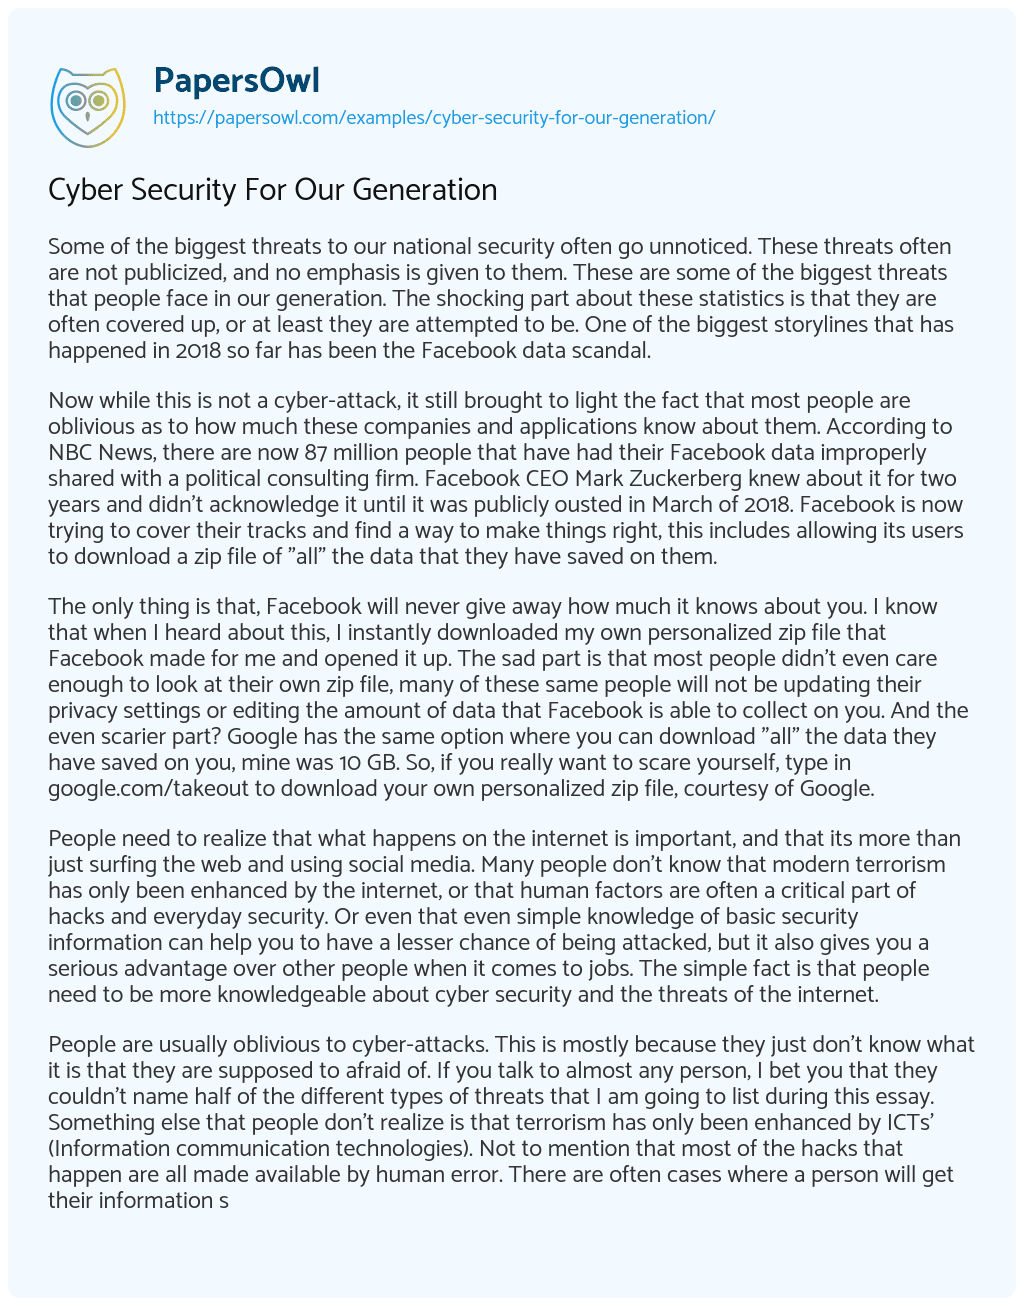 Essay on Cyber Security for our Generation